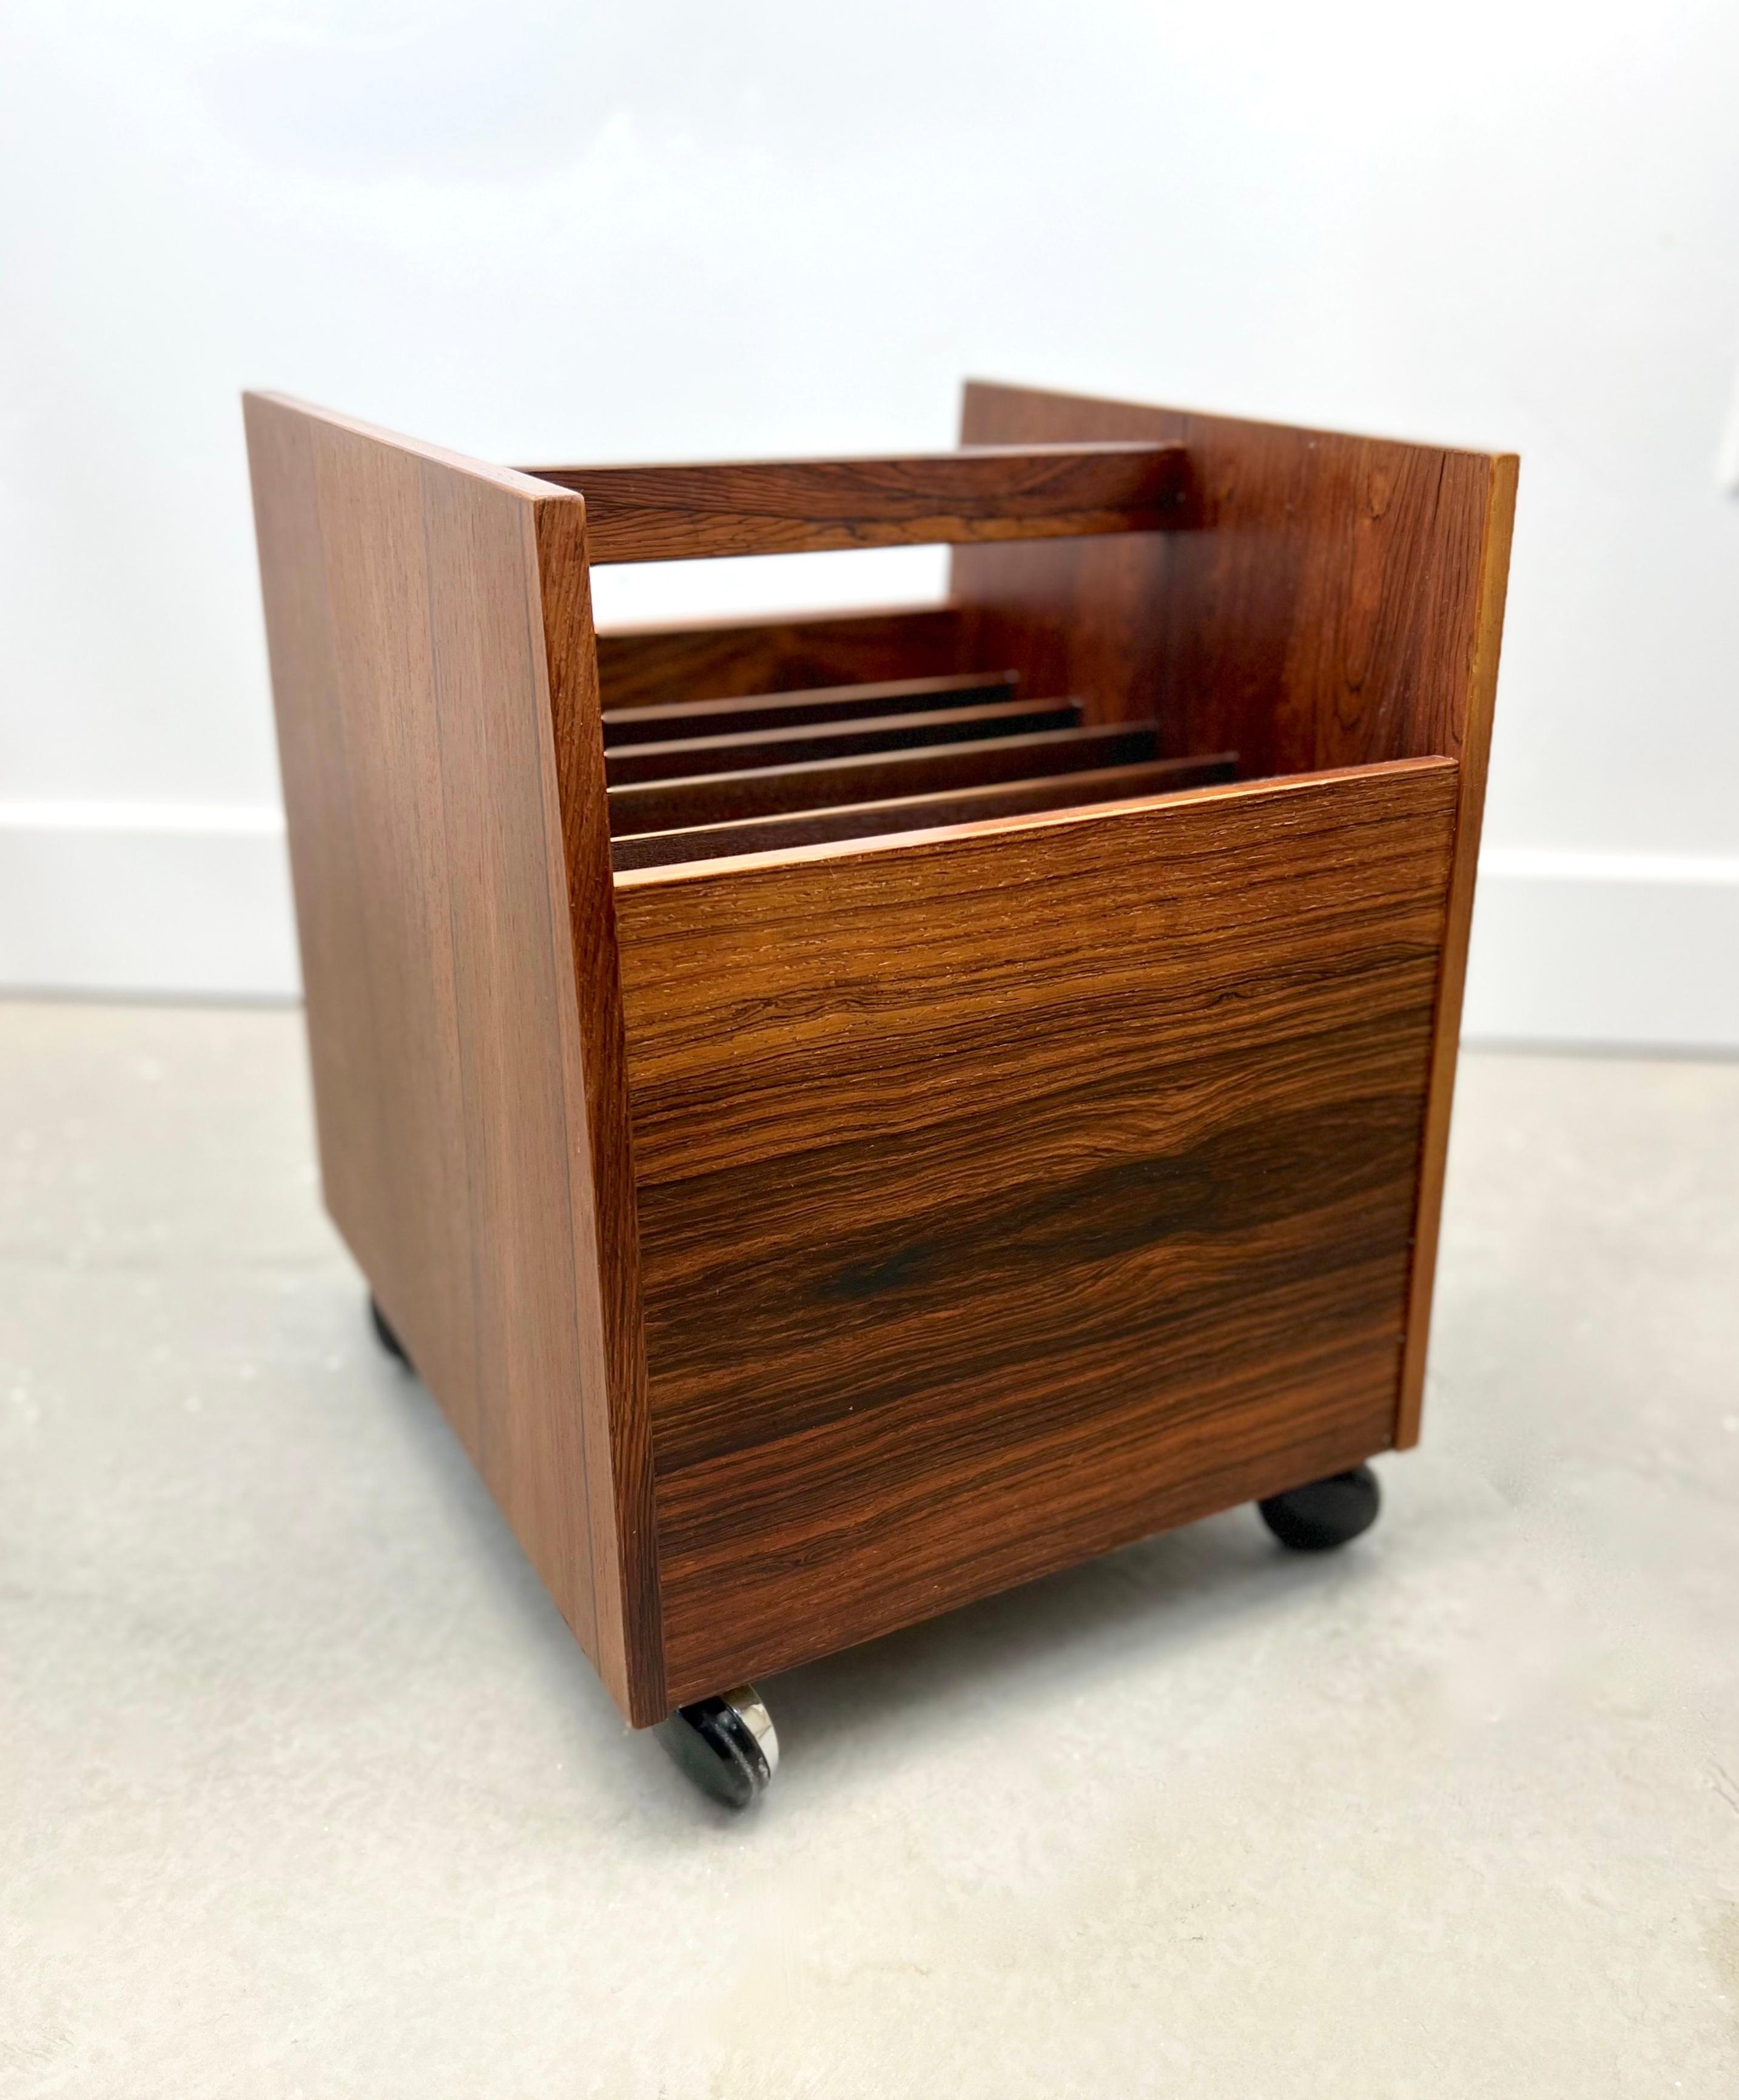 Stunning Mid-Century Modern Rolf Hesland rosewood magazine/record rack by Bruksbo of Norway. This rolling rack is in excellent condition with beautiful rosewood grain and six compartments for magazines or records. It has had very light use and the